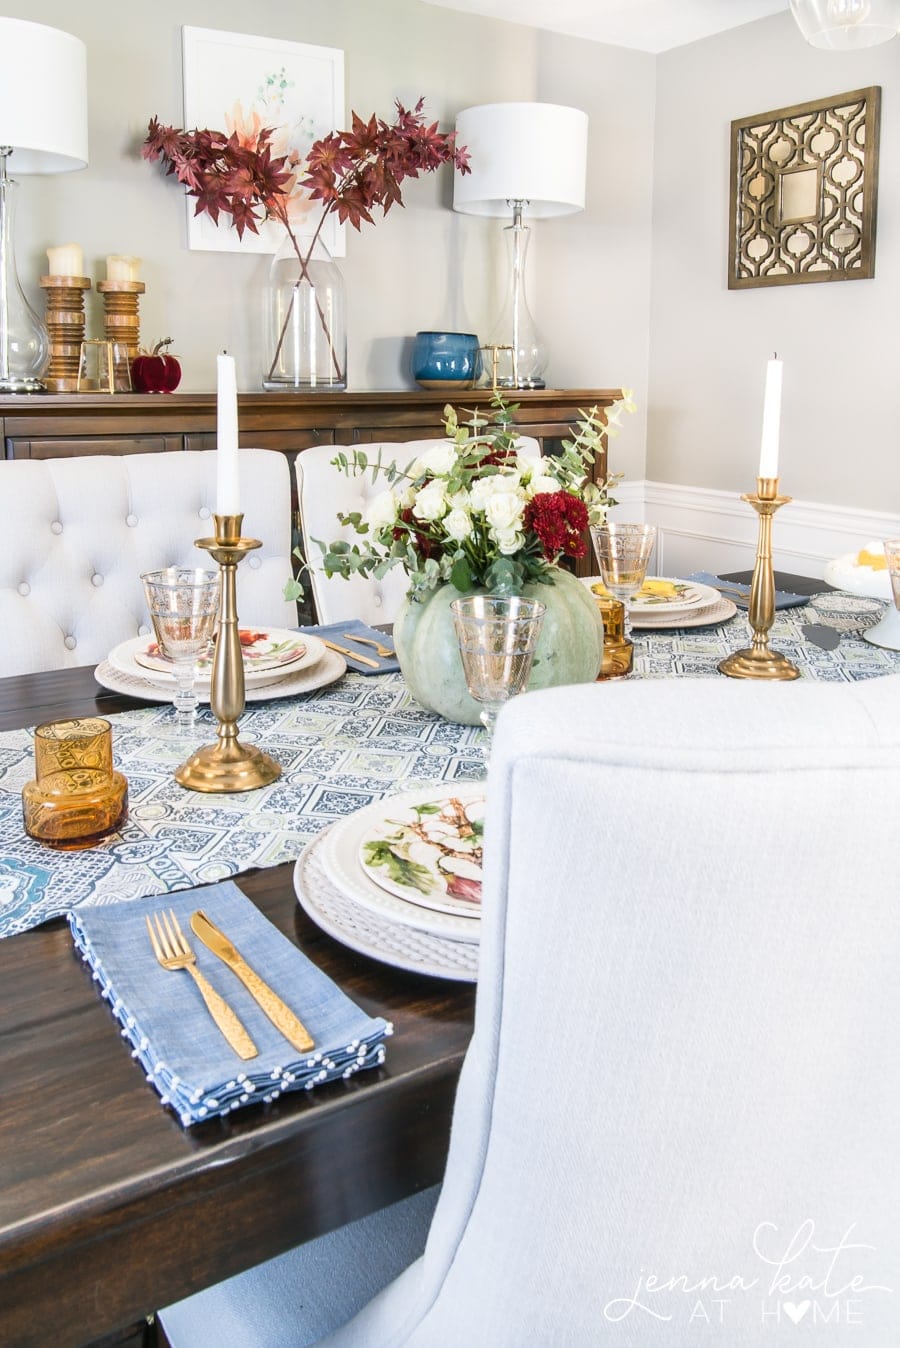 A different view of the dining table, showing the gold utensils resting on light blue cloth napkins, near brown glasses and gold candlesticks